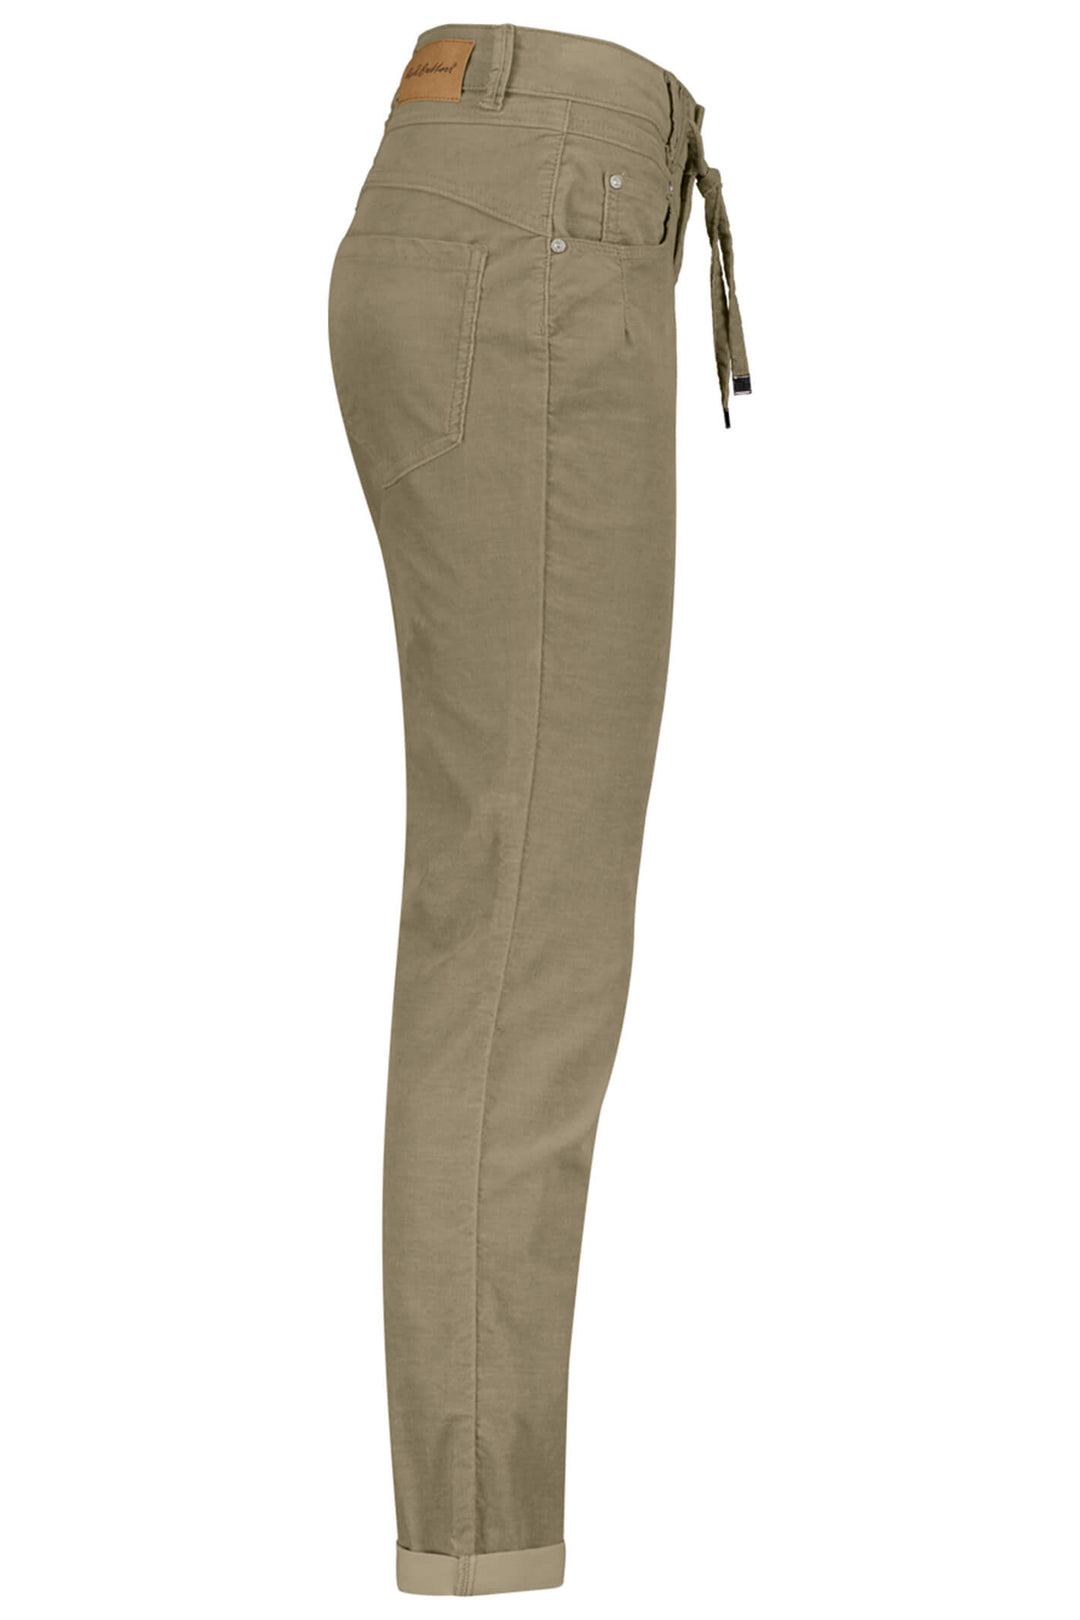 Red Button SRB4086 Relax Sage Green Fine Cord  Pull-On Trousers - Dotique